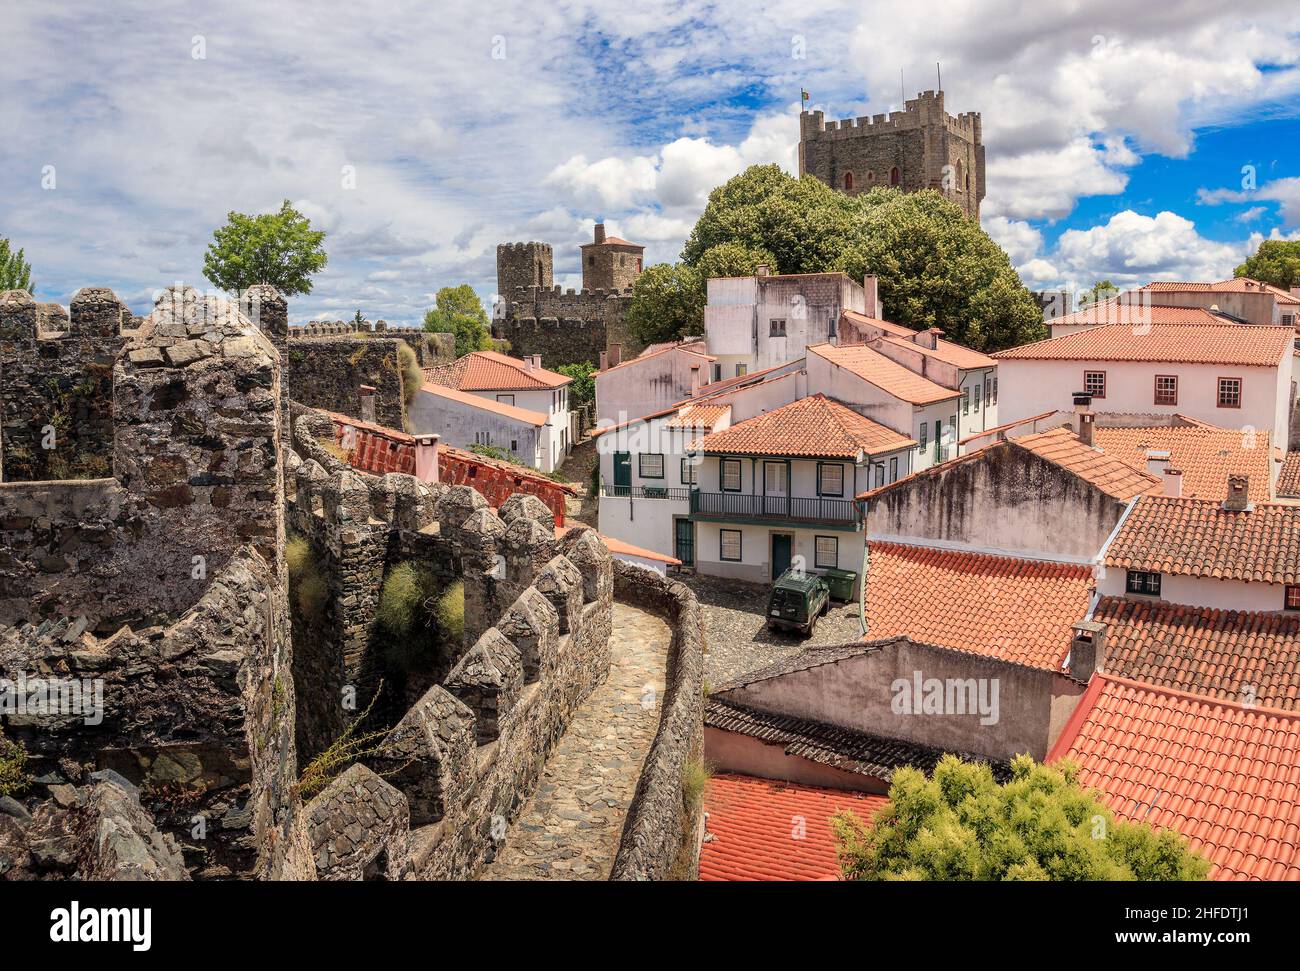 Exterior walls and houses of the citadel of Bragança in Portugal, with the castle keep in the background. Stock Photo